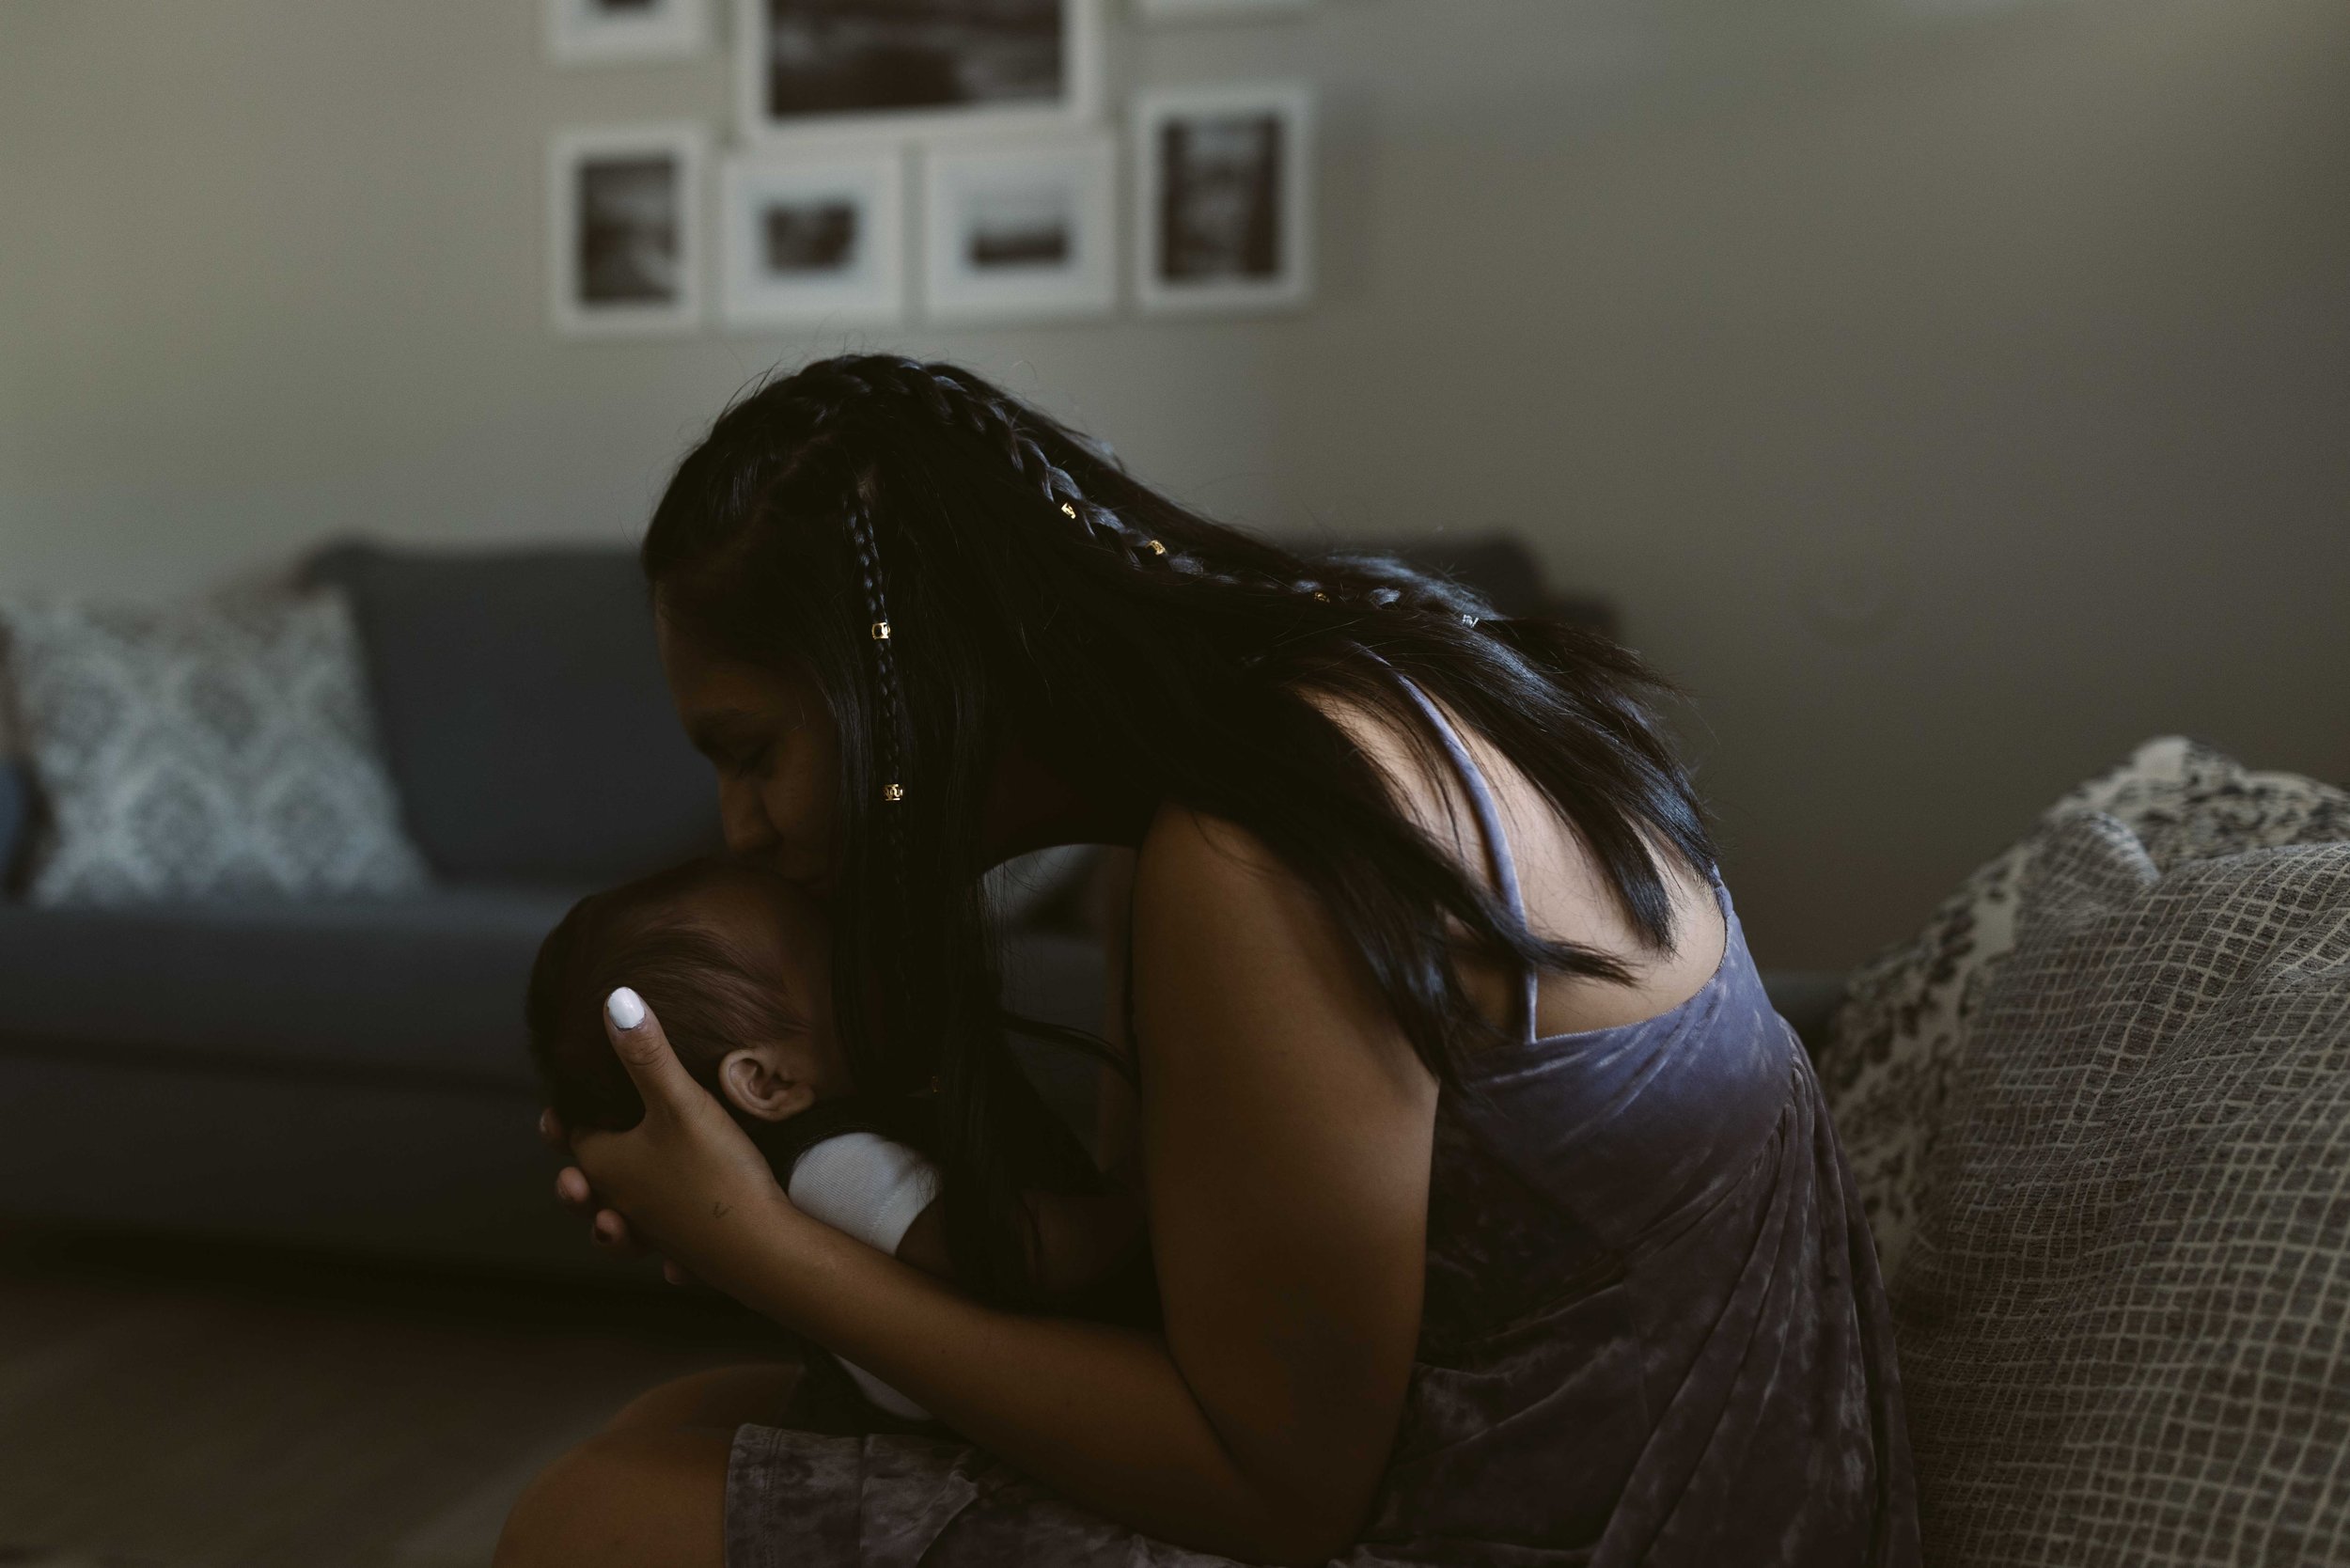  Arvada, Colorado - July 15, 2022: After finding out she was pregnant again,  LaTavia had to find help and a home fort her, her daughter Amidala and her baby on the way. Hope House provided them with a roof and lots of support. LaTavia holds her baby